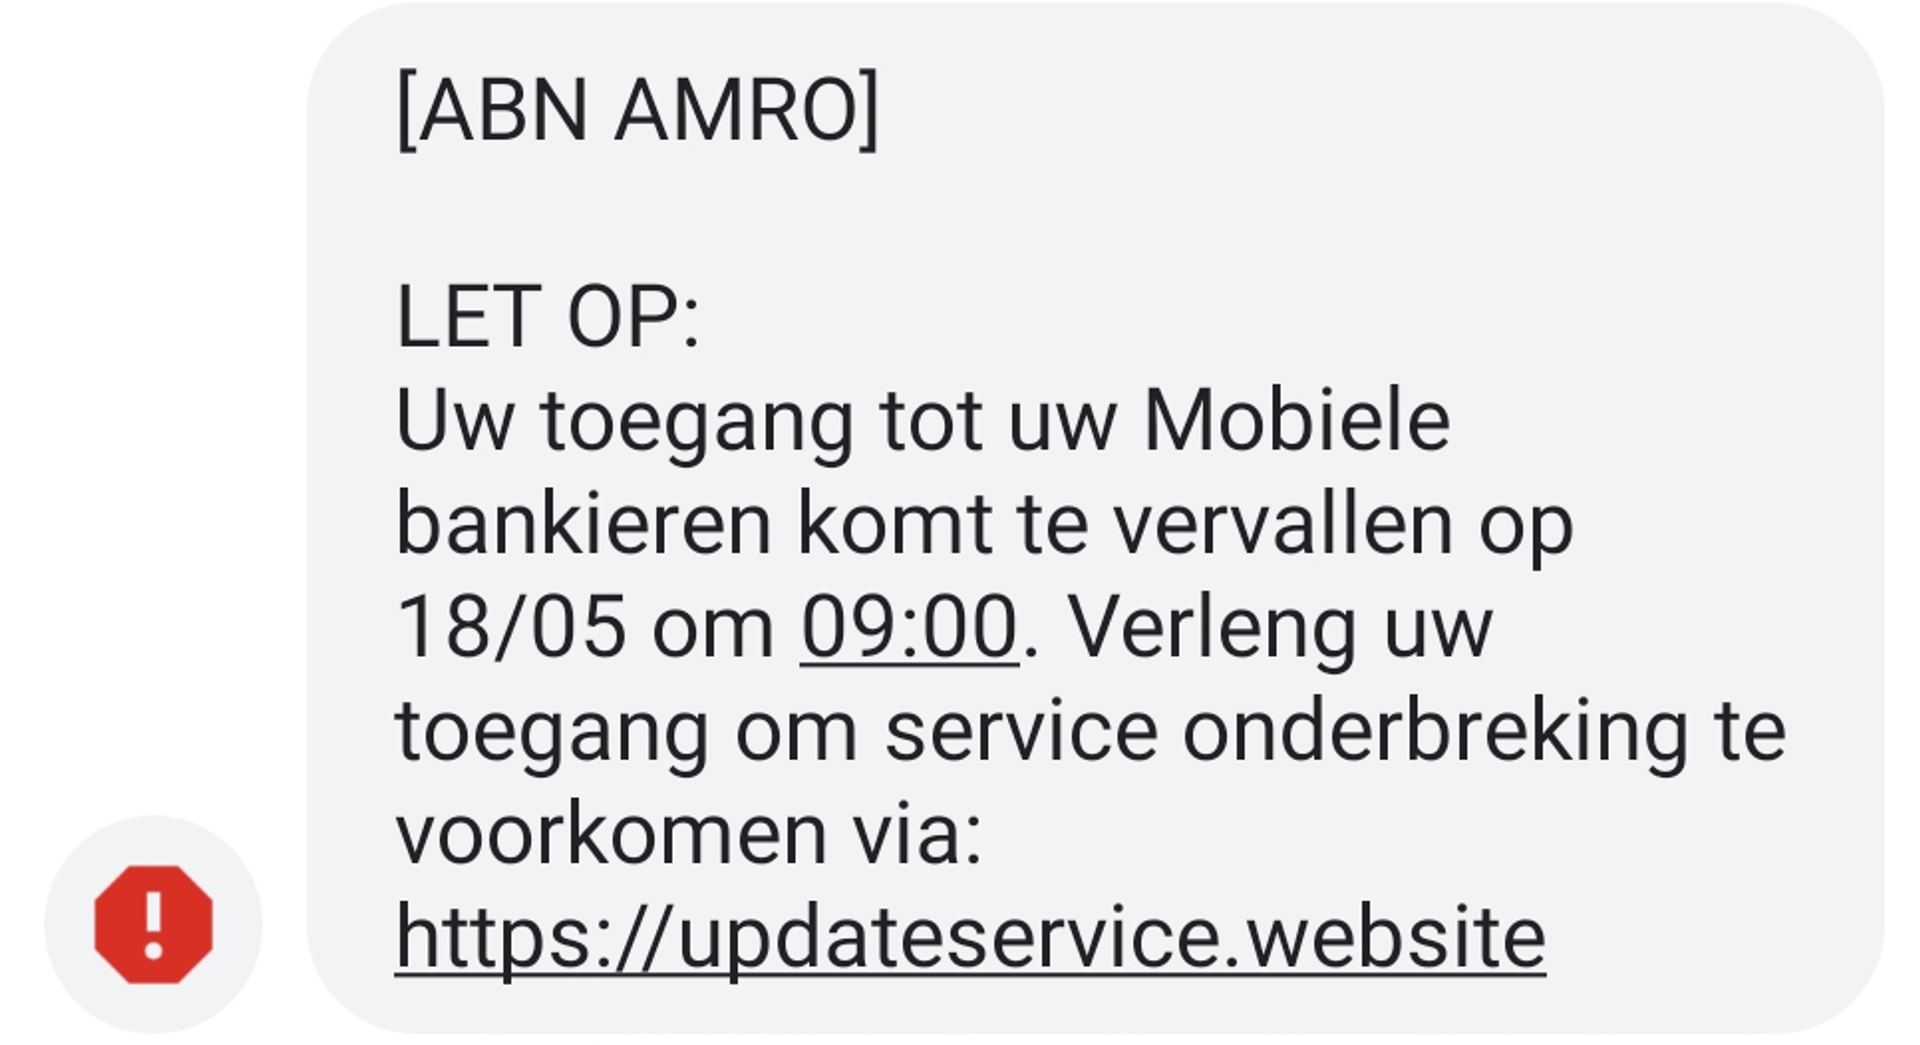 sms abn amro nep2